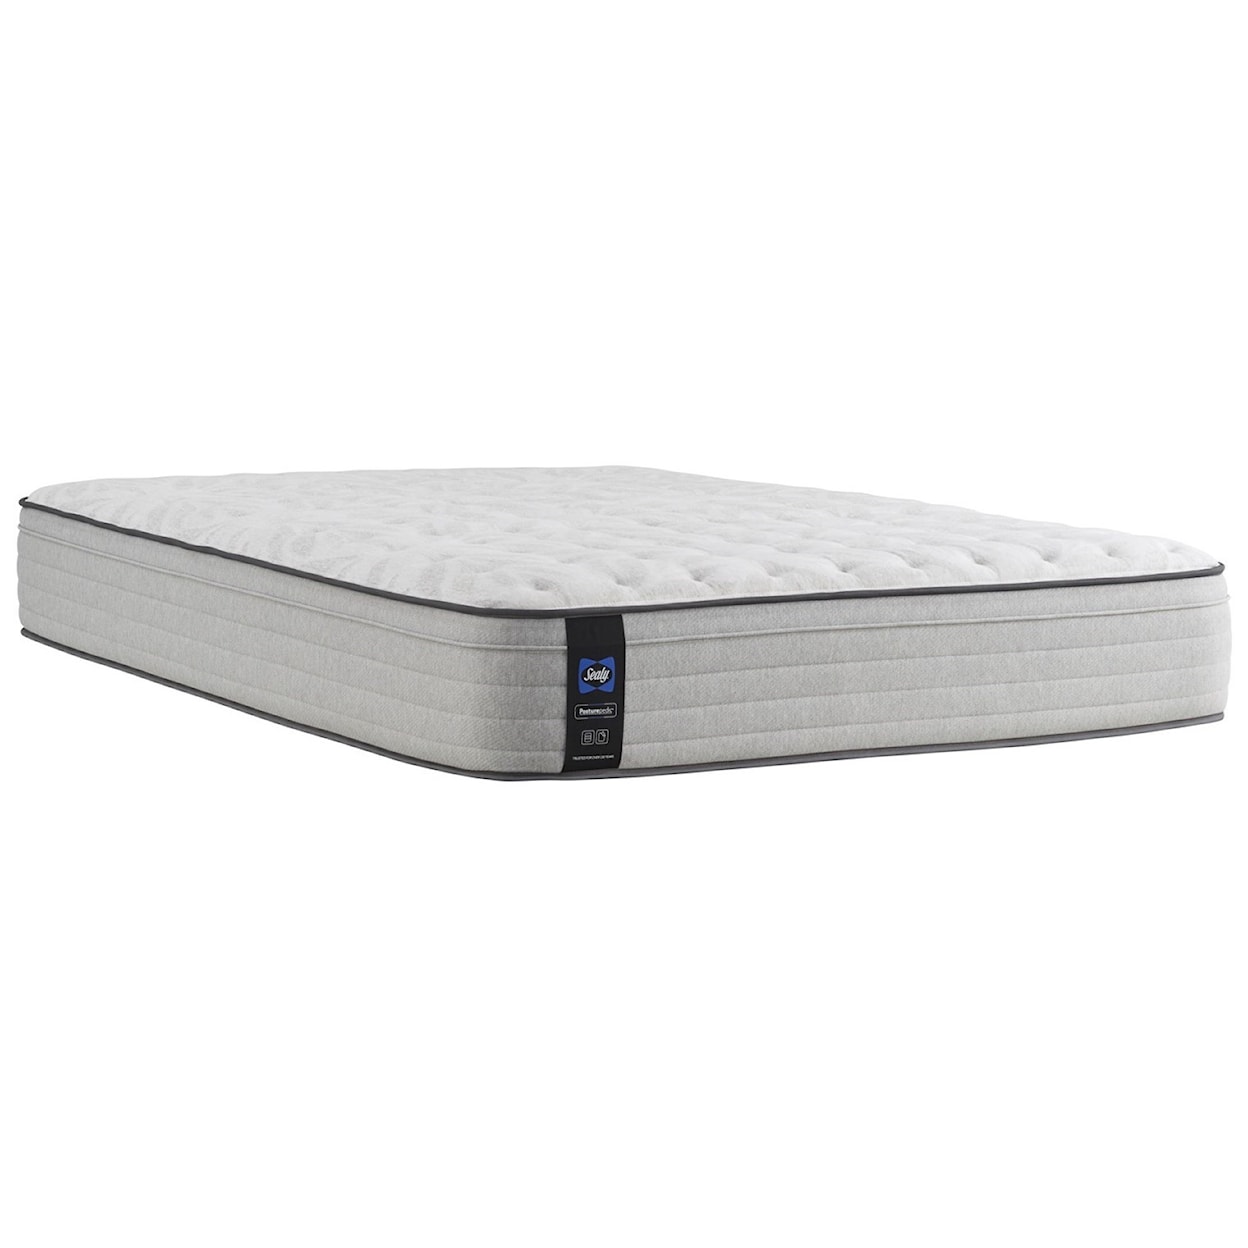 Sealy PPS3 Posturpedic Innerspring Soft FXET Cal King 13" Soft Faux Euro Top Mattress